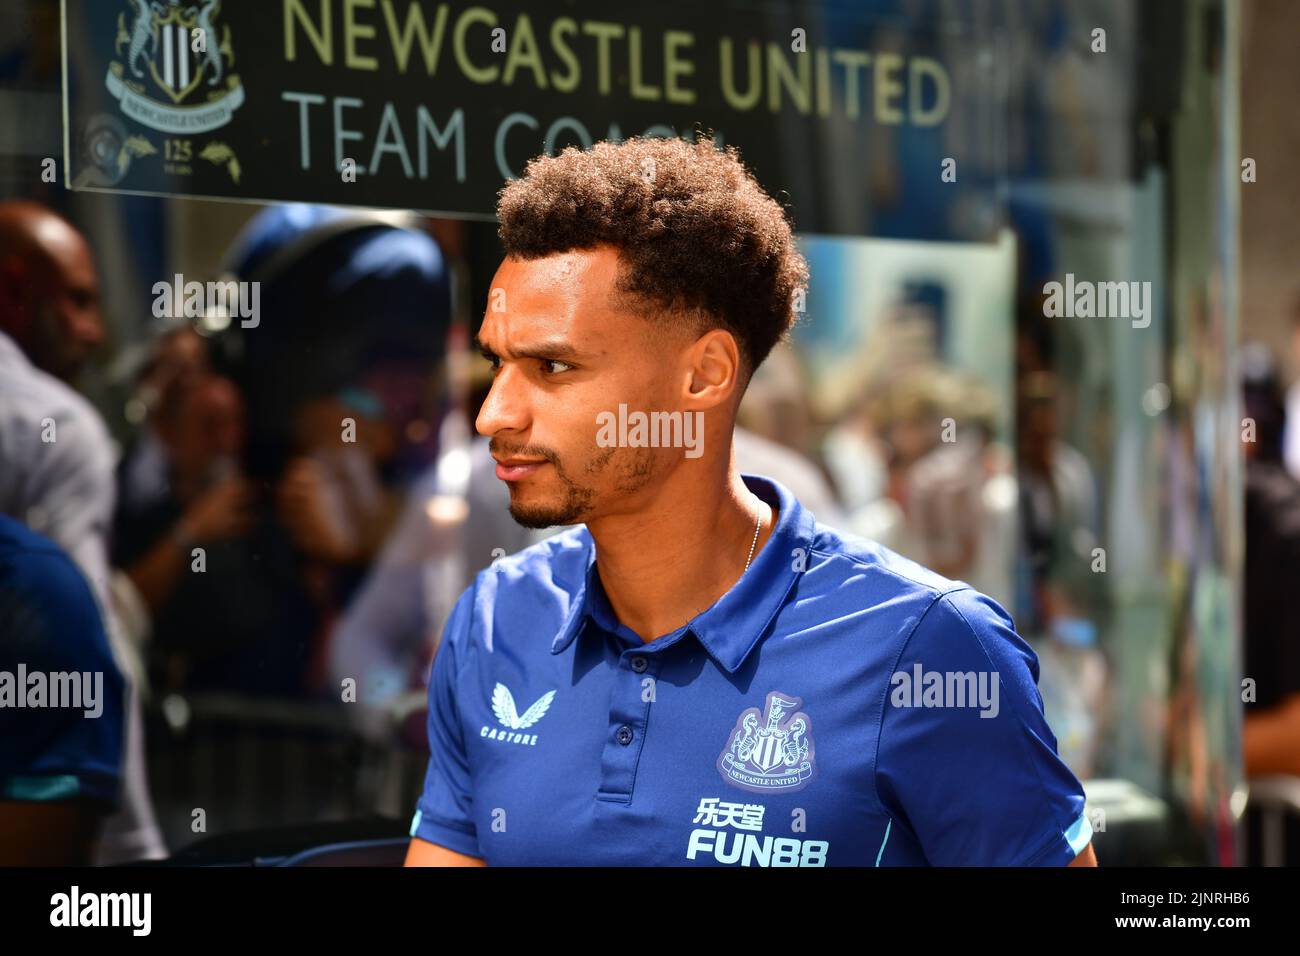 Brighton, UK. 13th Aug, 2022. Jamal Lewis of Newcastle United arrives for the Premier League match between Brighton & Hove Albion and Newcastle United at The Amex on August 13th 2022 in Brighton, England. (Photo by Jeff Mood/phcimages.com) Credit: PHC Images/Alamy Live News Stock Photo